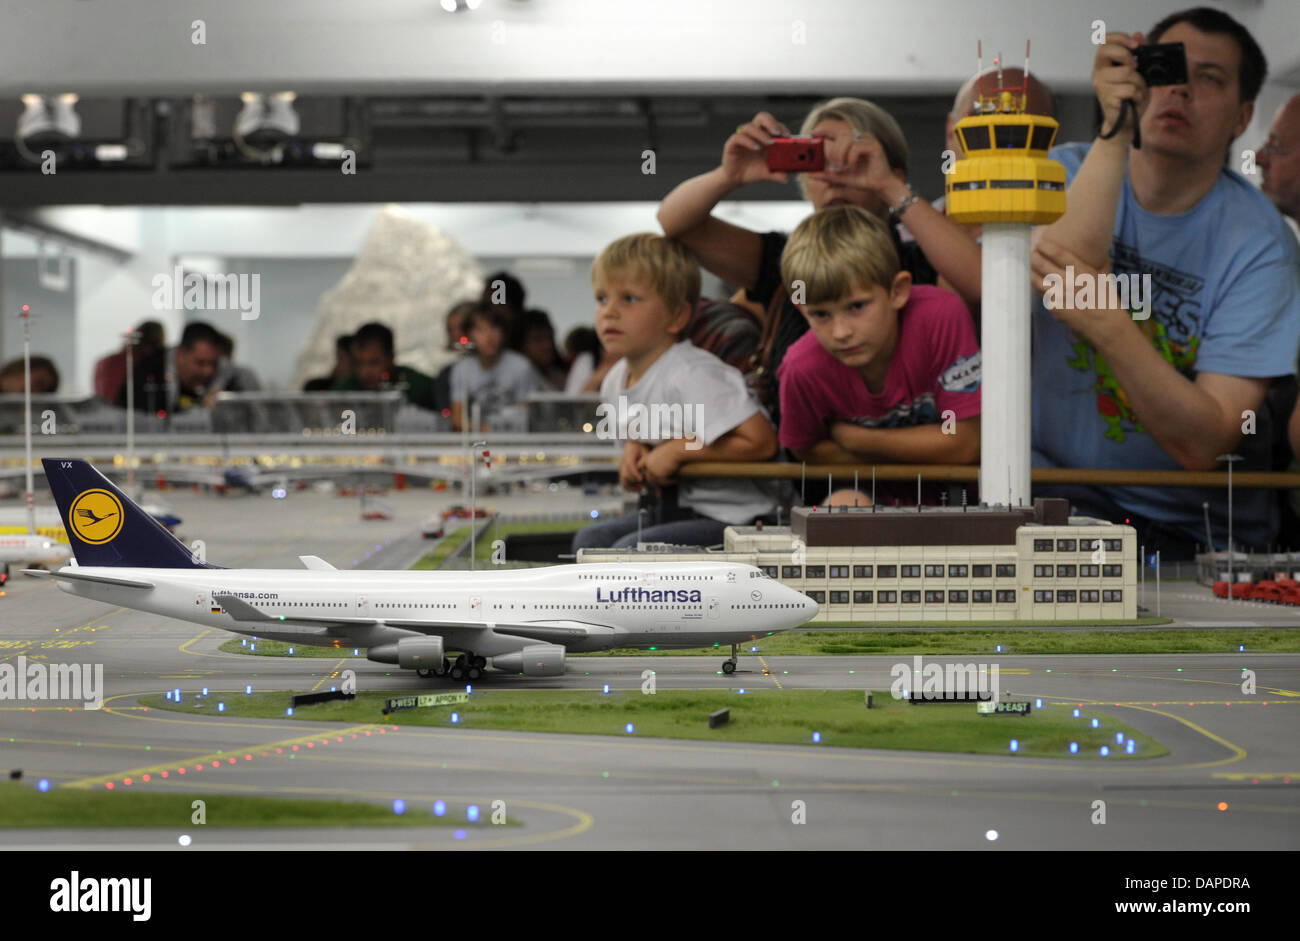 Visitors look at 'Knuffingen' airport at the model railway Miniatur Wunderland in Hamburg, Germany, 12 August 2011. Miniatur Wunderland is celebrating its 10 year anniversary on Tuesday. Since its opening on 16 August 2001, around 8.3 million visitors have come to see the world's largest model railway. Photo: CHRISTIAN CHARISIUS Stock Photo